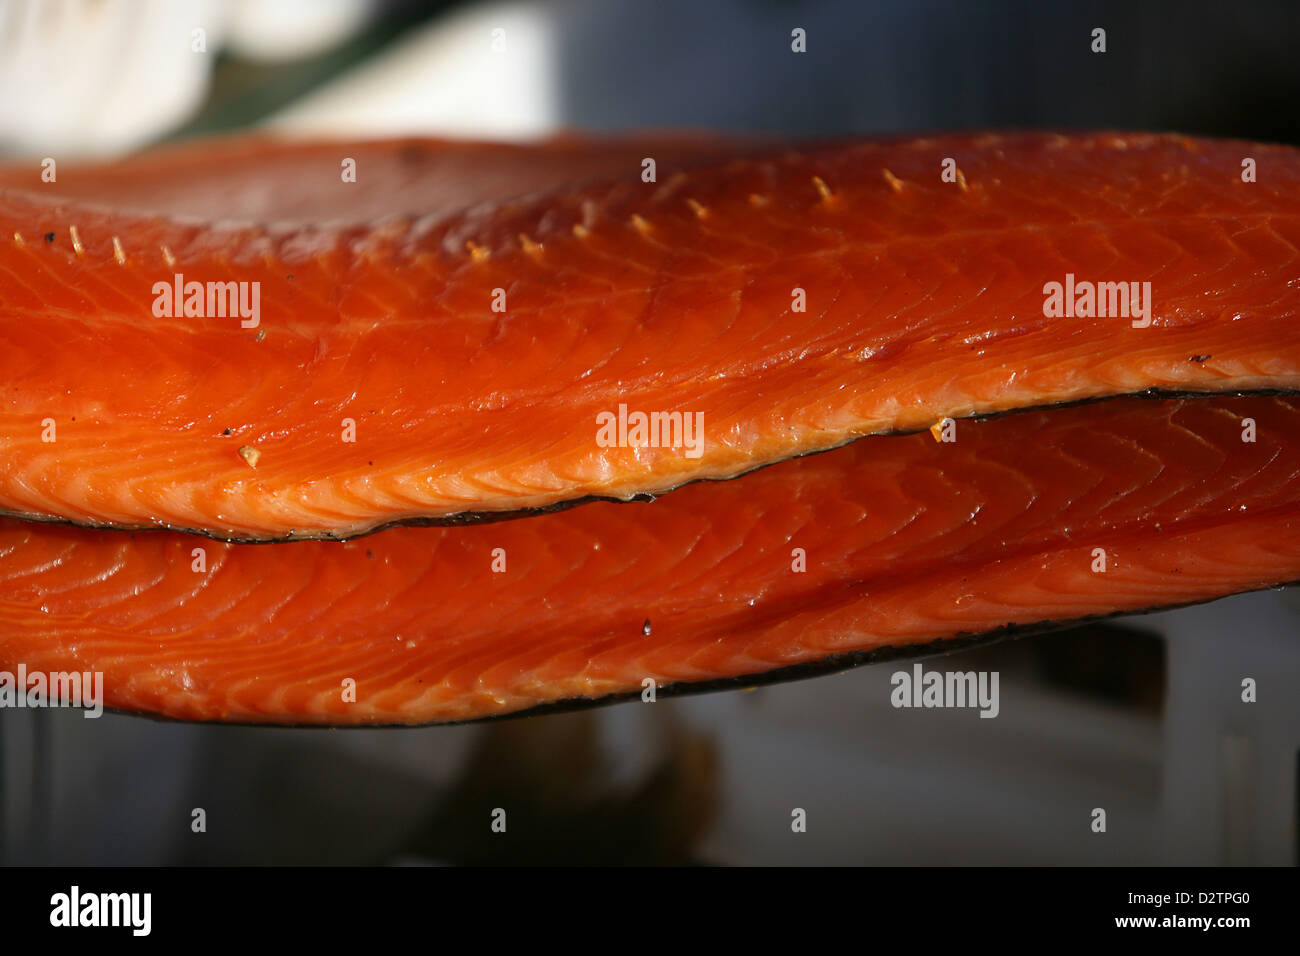 Fillet of a red smoked fish Stock Photo